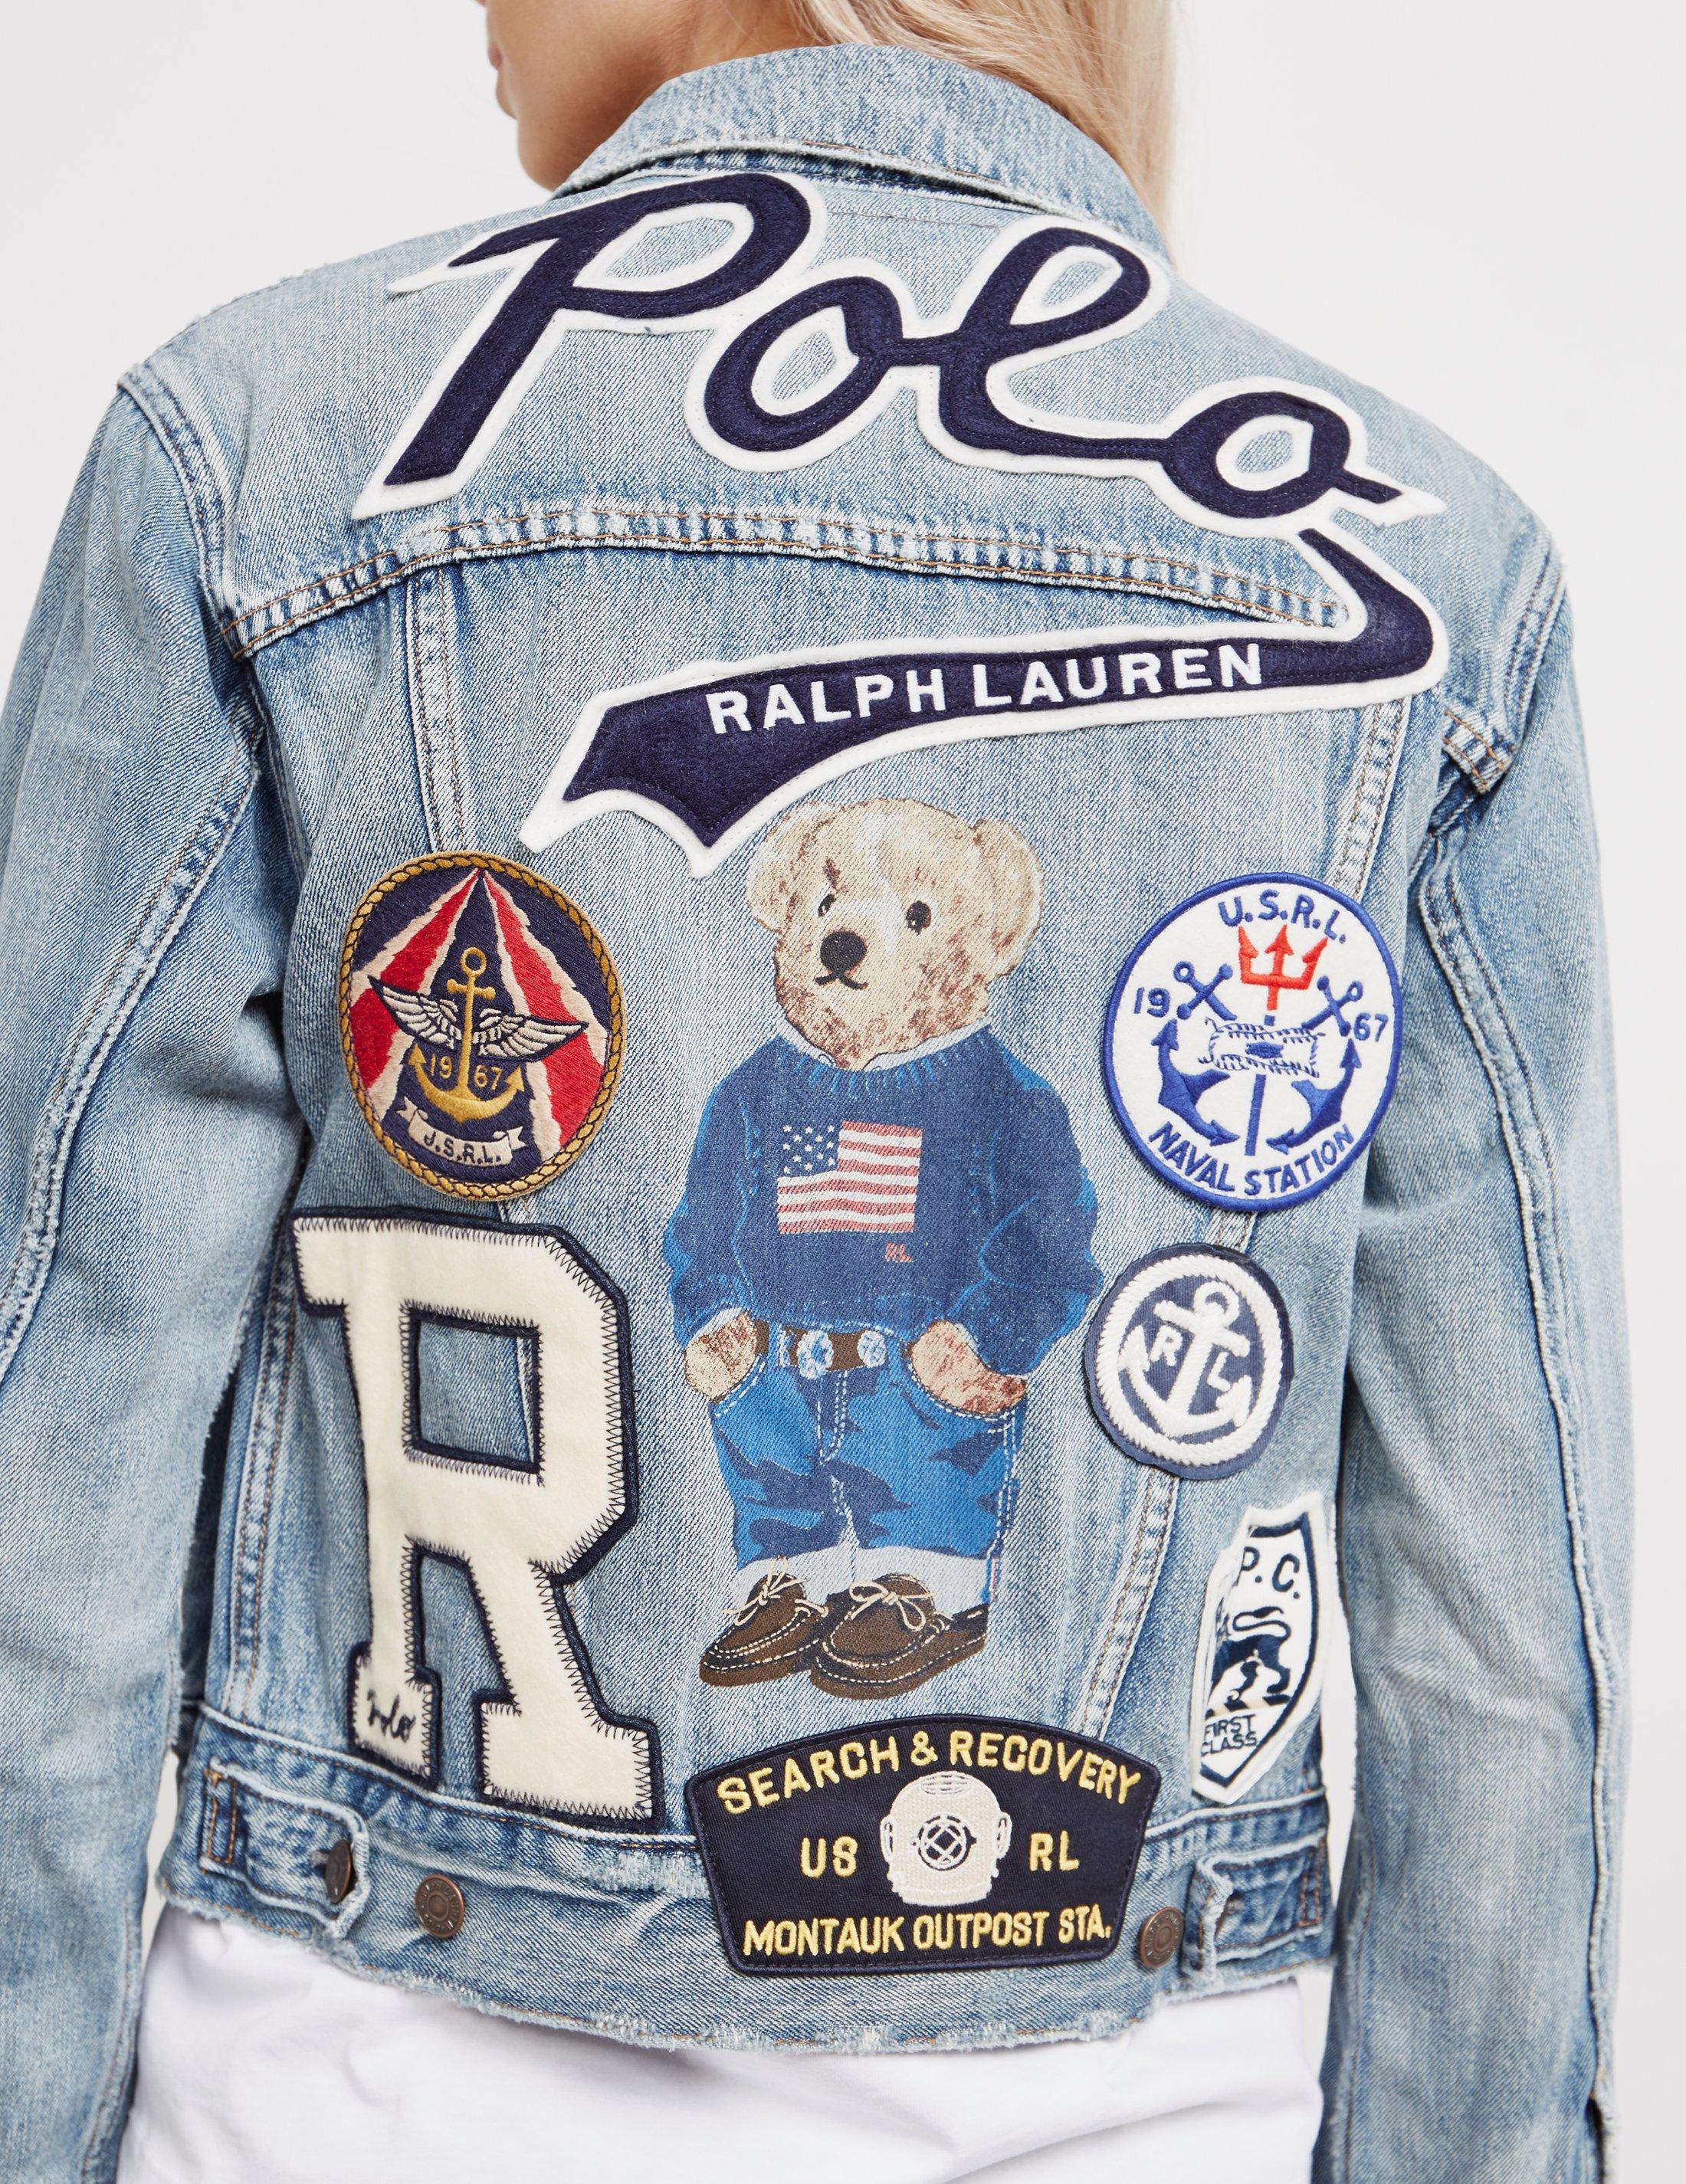 polo jean jacket with fur